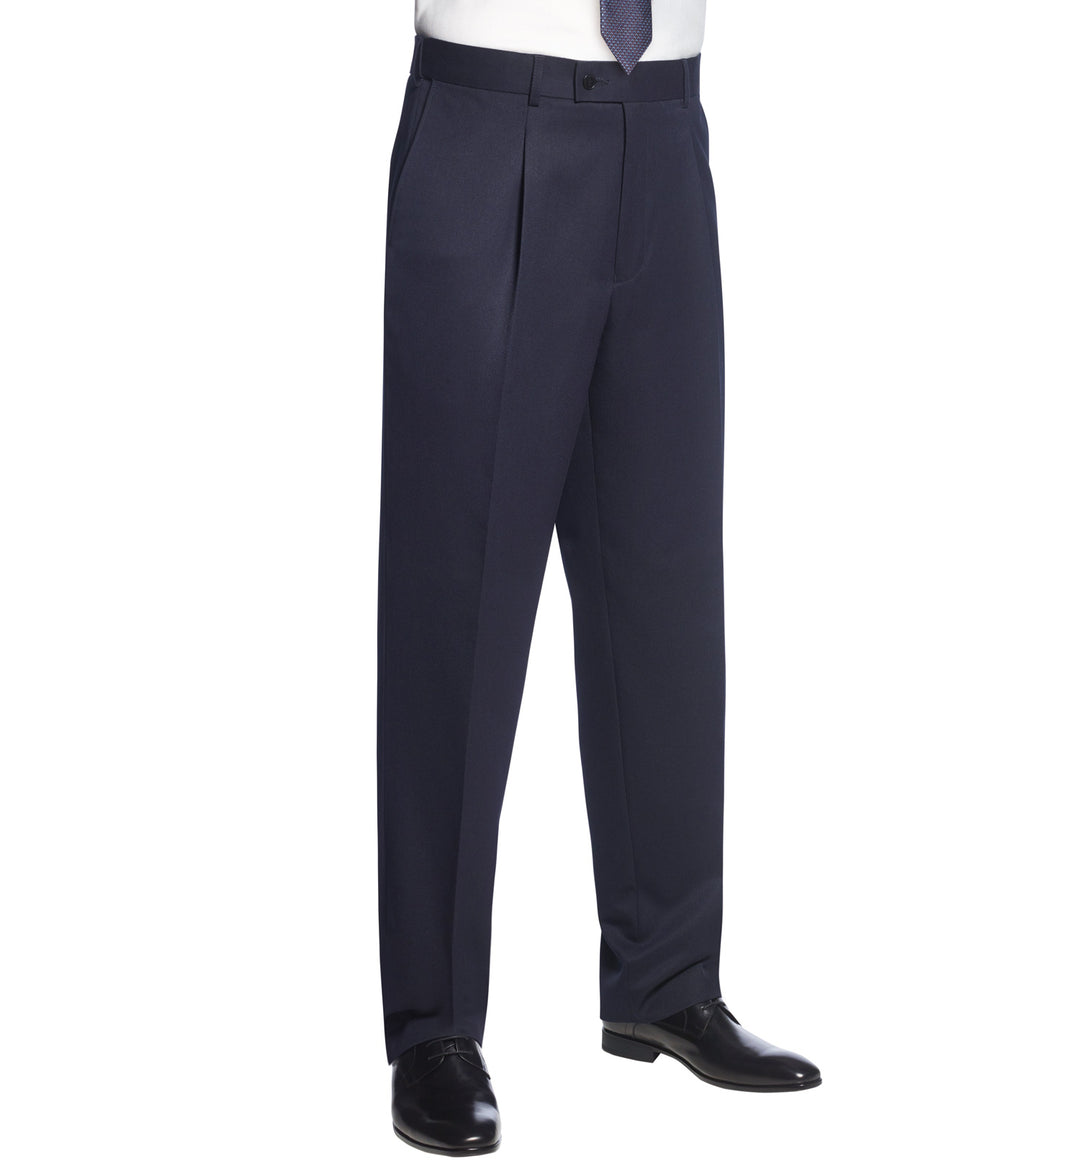 Delta Classic Fit Trouser in Navy